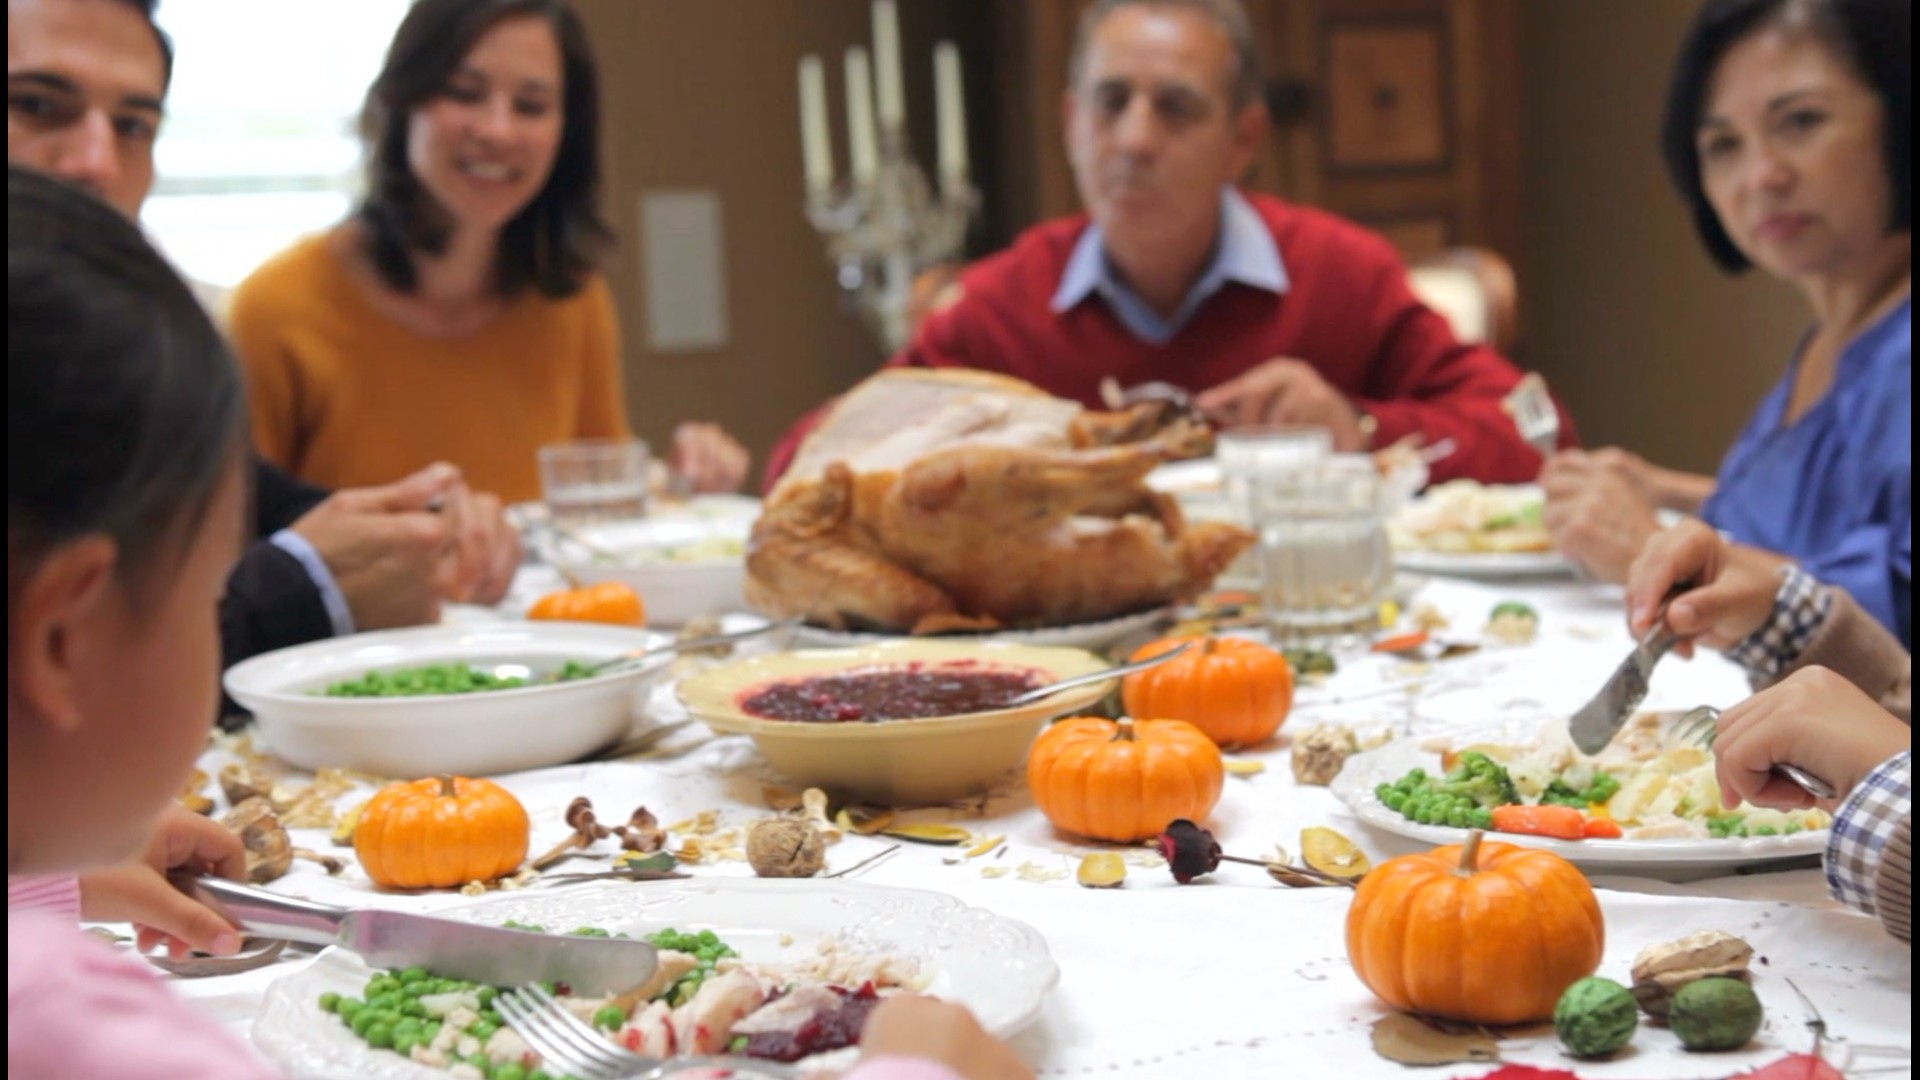 This year, alleviate your anxiety levels pre-turkey dinner with these very useful do's and don'ts. Buzz60's Maria Mercedes Galuppo has more.